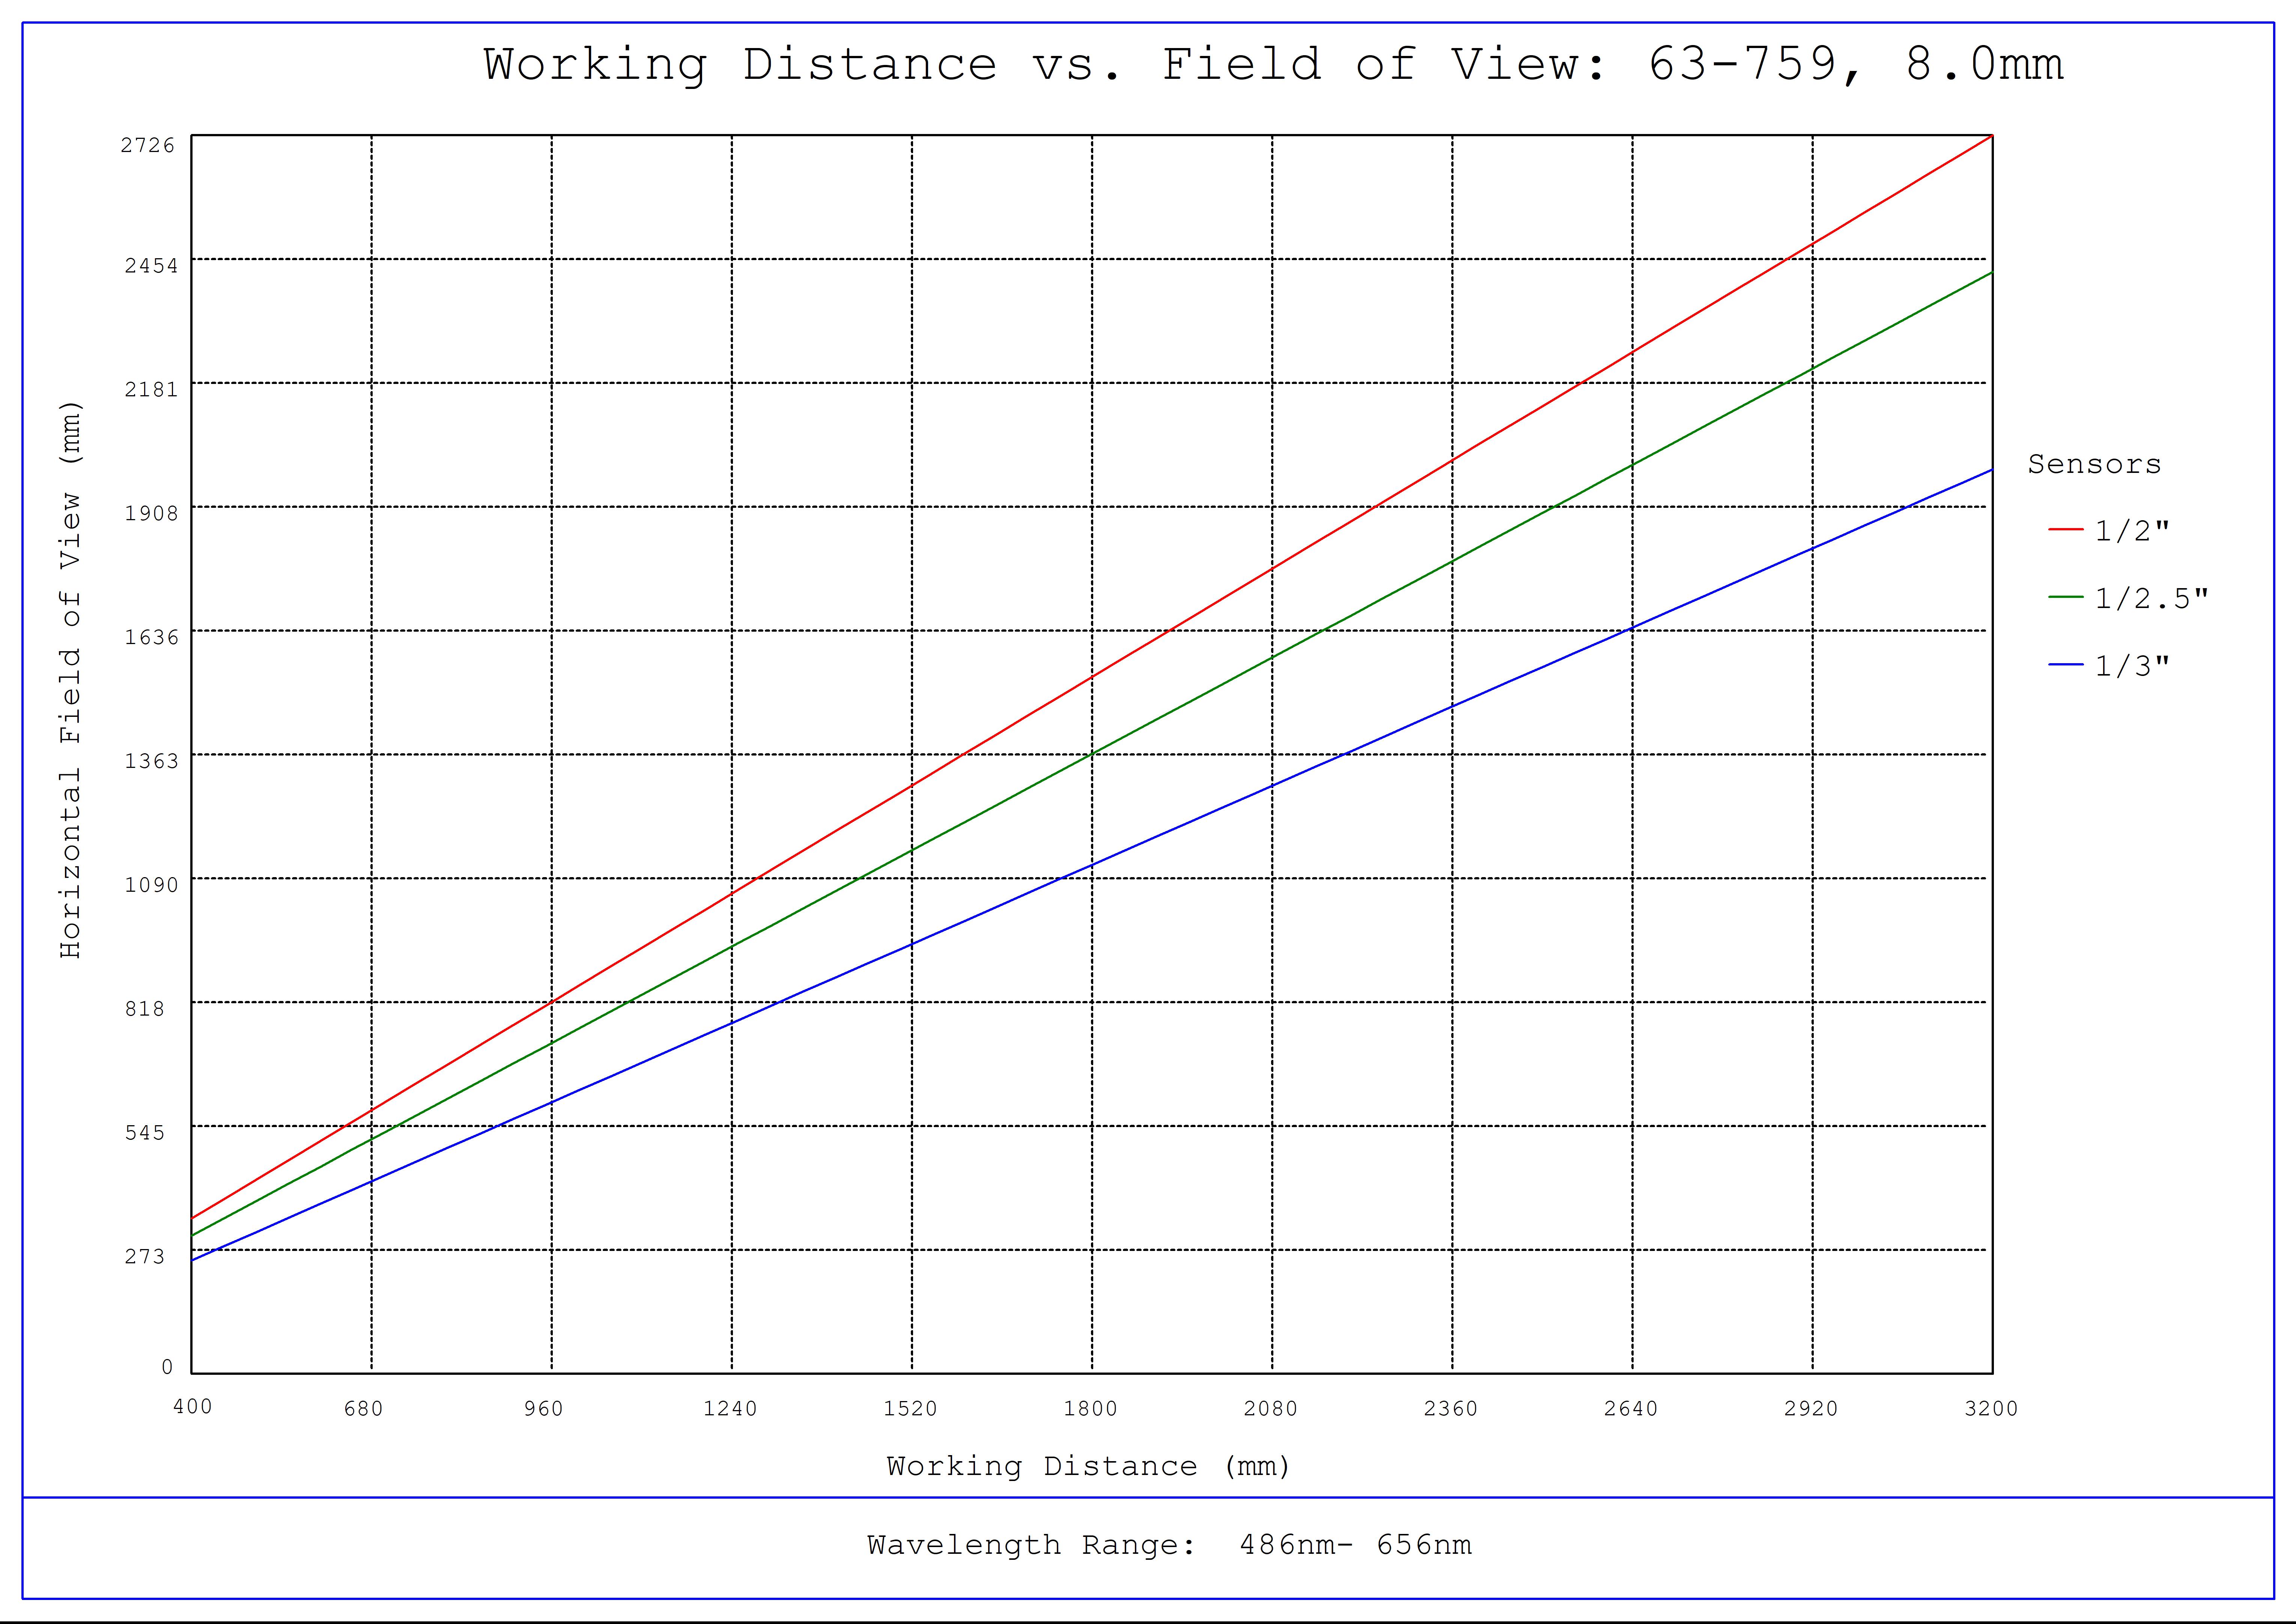 #63-759, f/2.5, Visible, 8.0mm HEO Series M12 Lens, Working Distance versus Field of View Plot